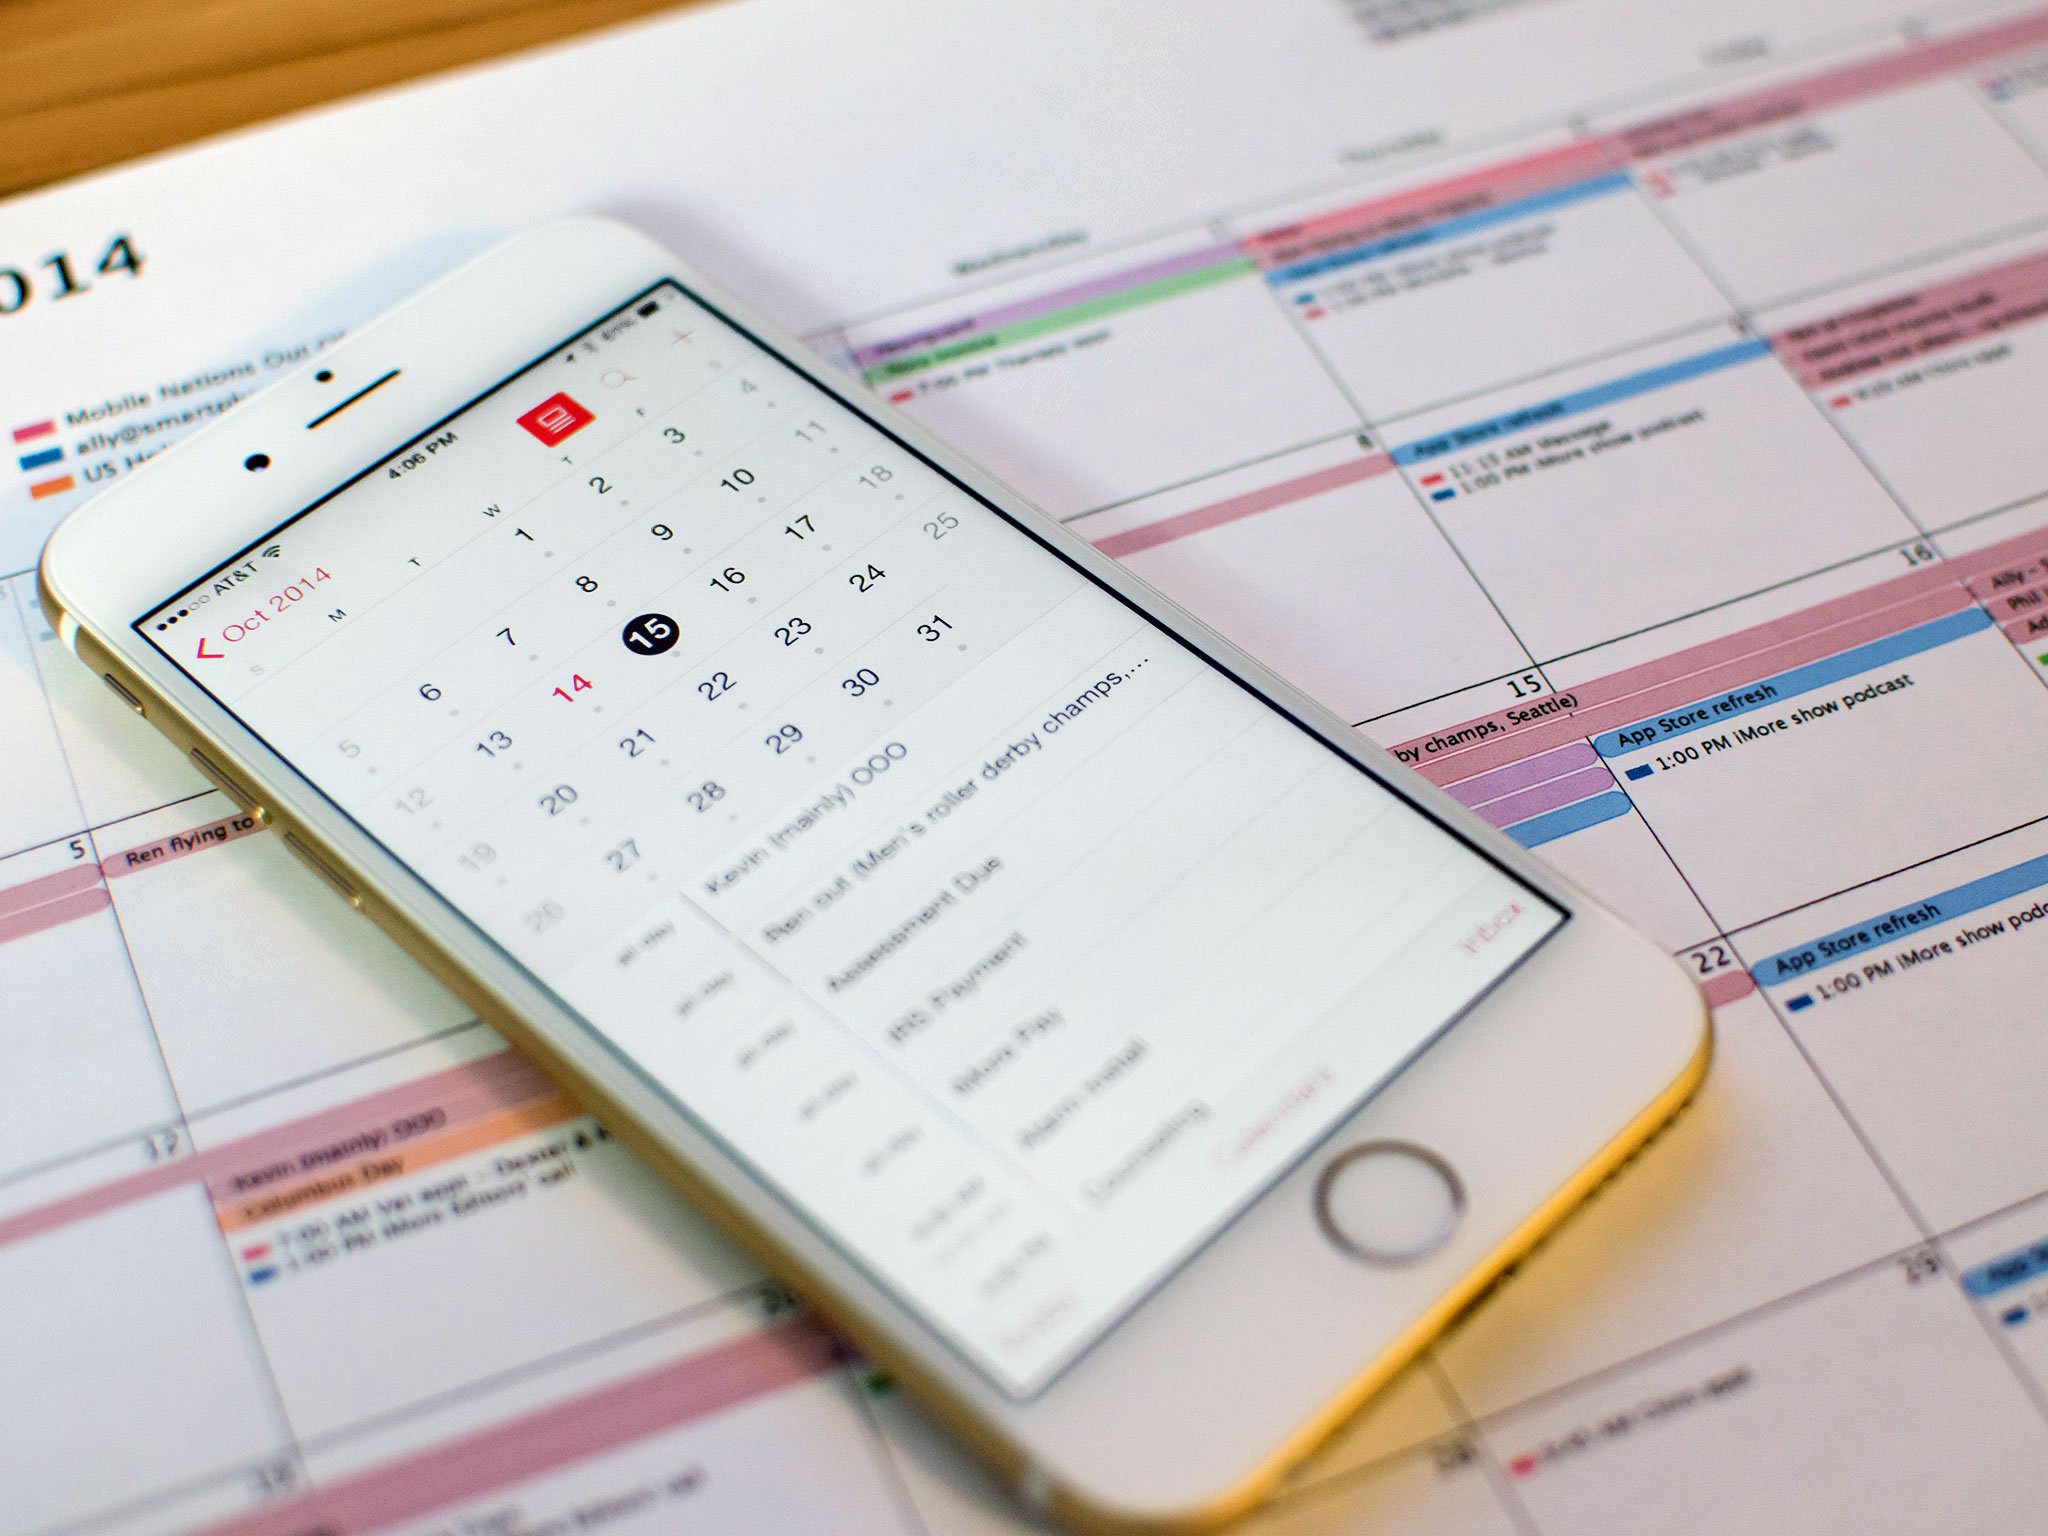 How to share events with Calendar for iPhone and iPad iMore